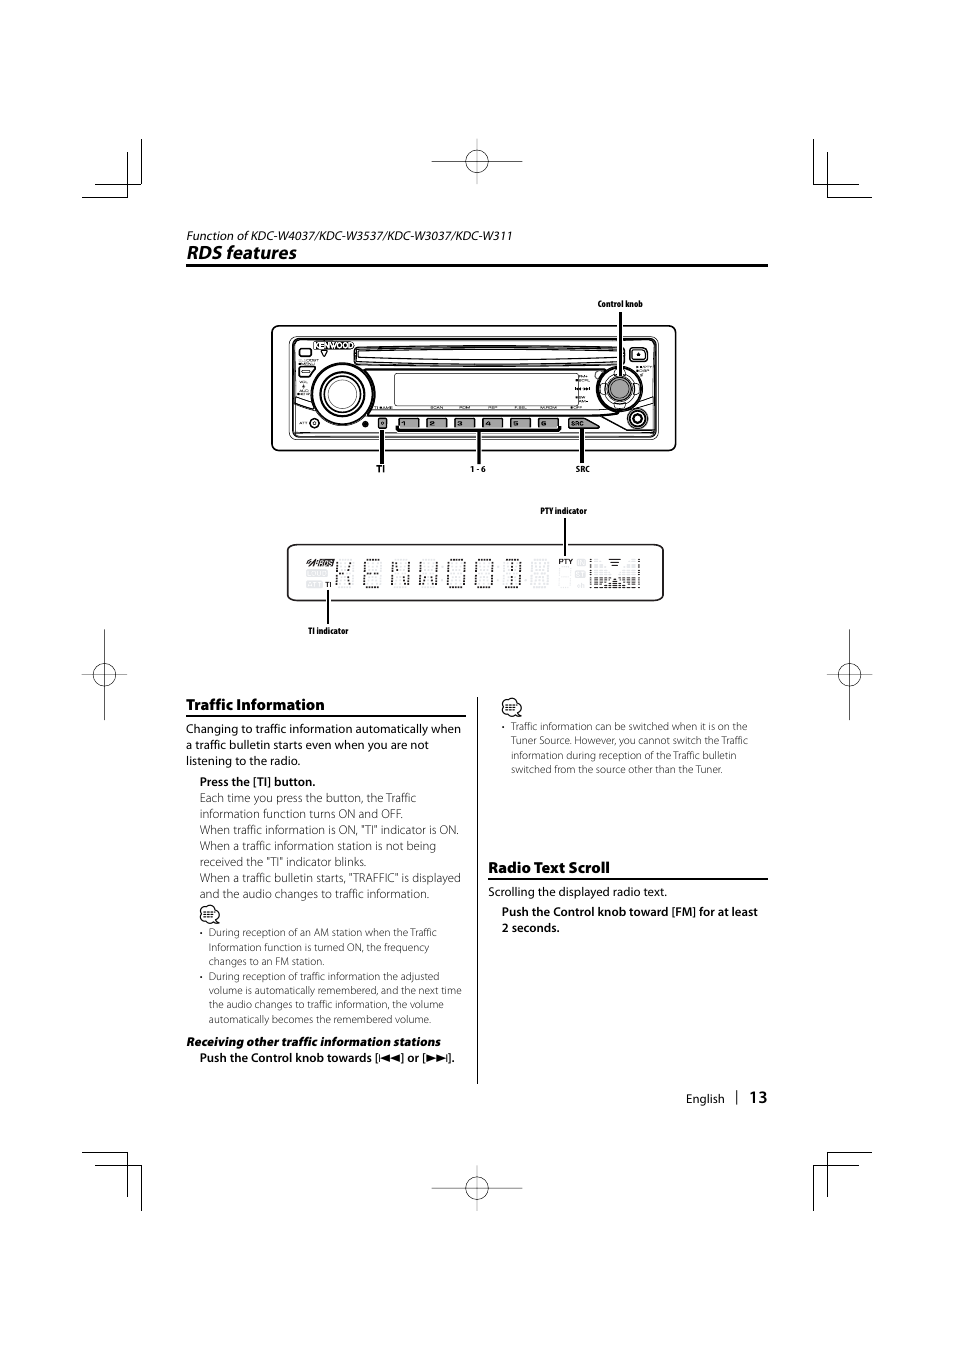 Rds features | Kenwood KDC-W4037 User Manual | Page 13 / | Original mode